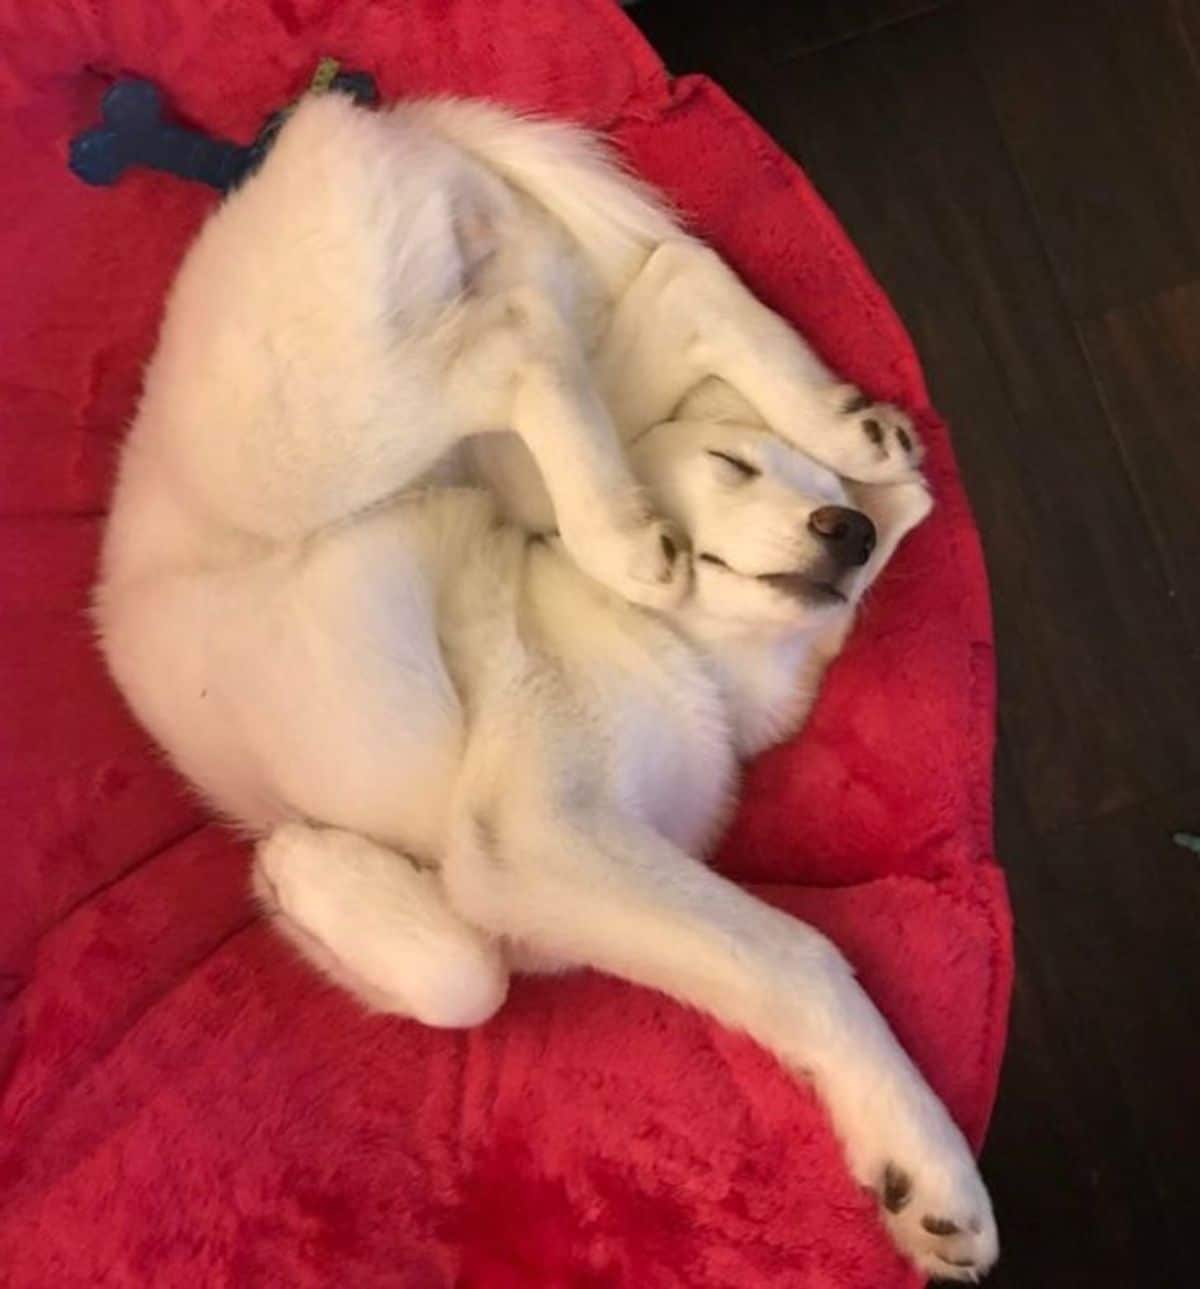 white dog sleeping while contorted on a red dog bed